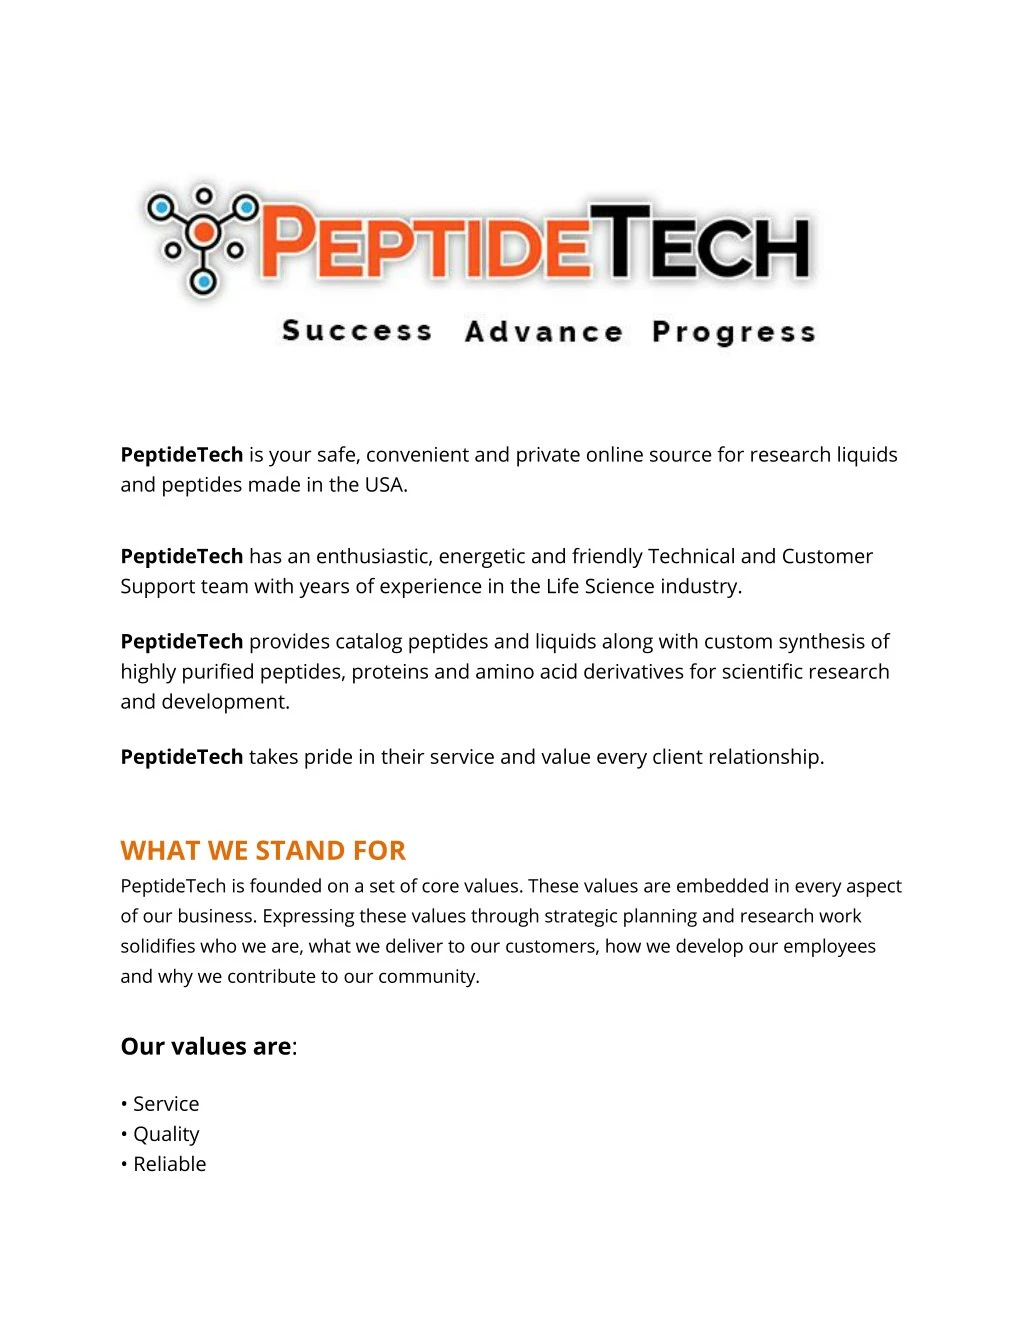 peptidetech is your safe convenient and private